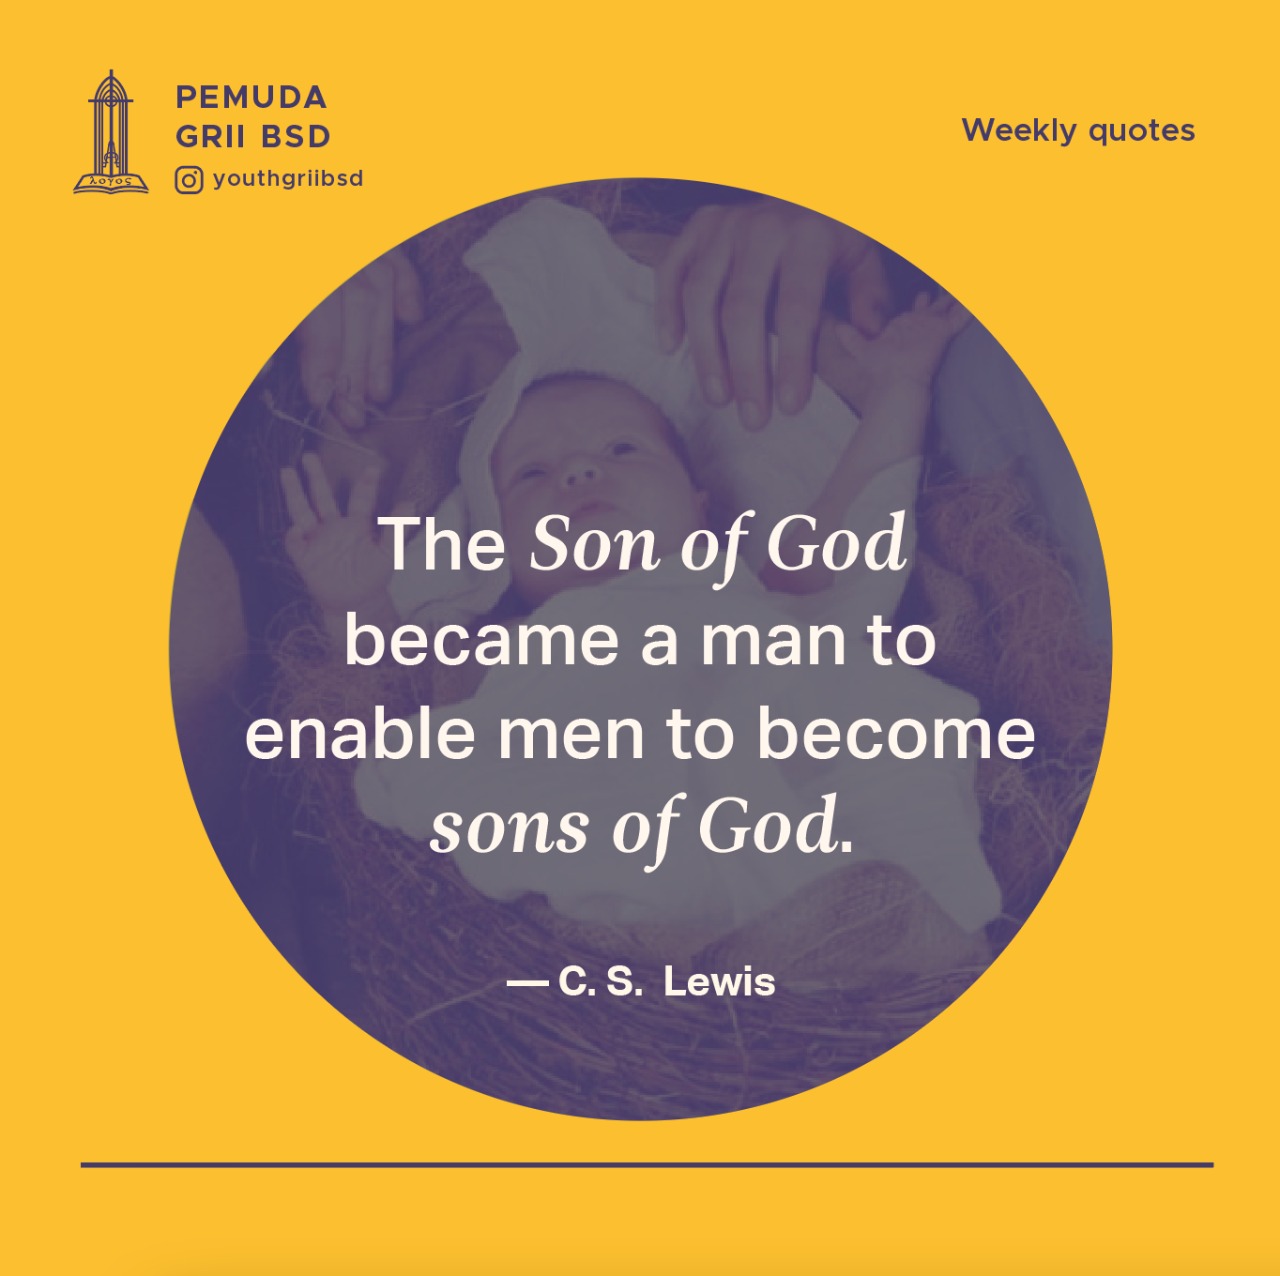 The Son of God became a man to enable men to become sons of God.